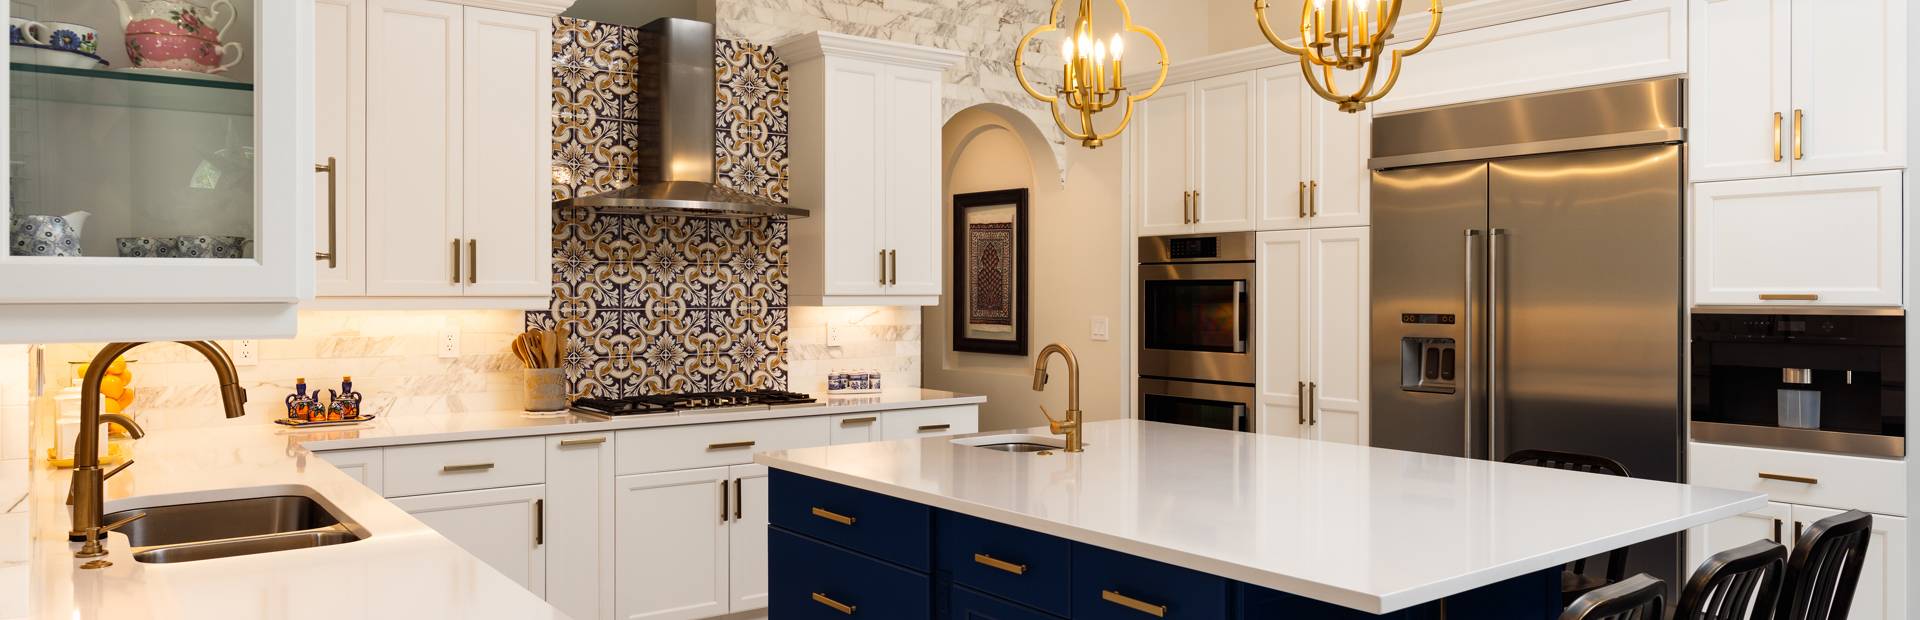 We can handle the details and advise you on how to bring your vision to life; your job is to figure out what you need and want out of your new kitchen space.